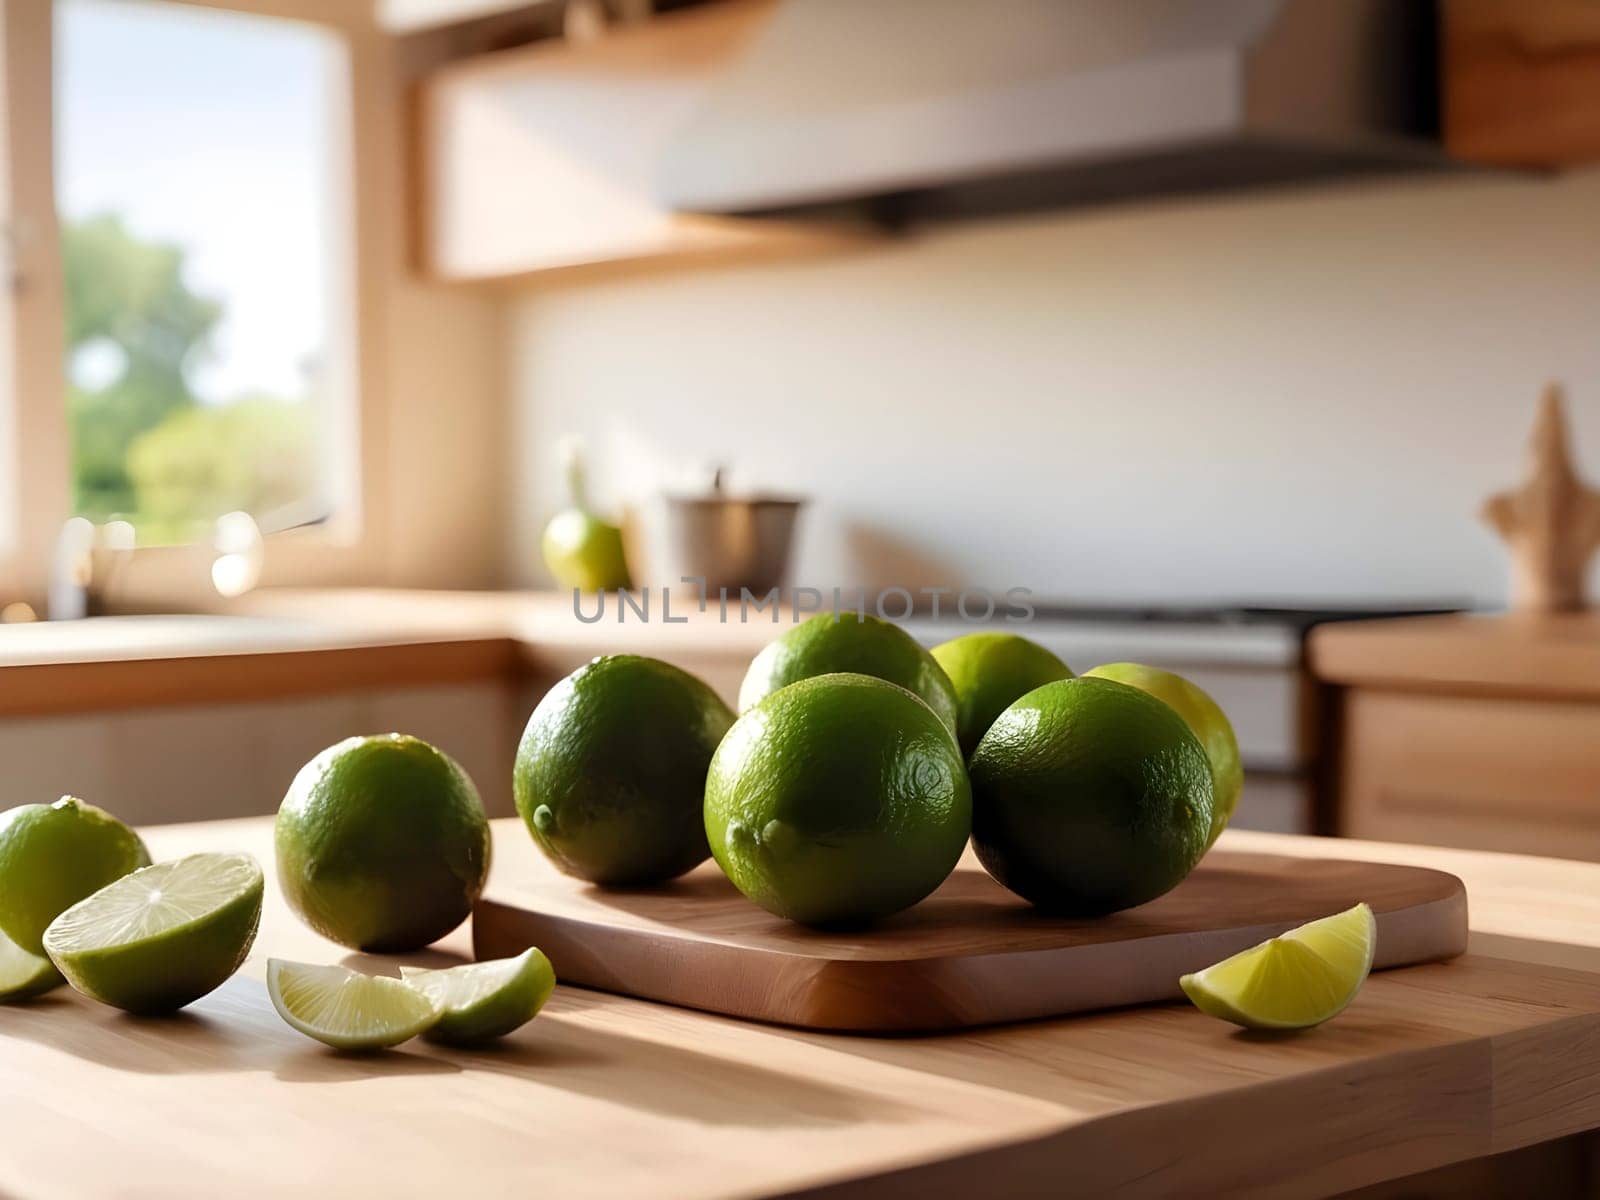 Kitchen Elegance: Limes on Wooden Surface Illuminated by Warm Afternoon Sun by mailos